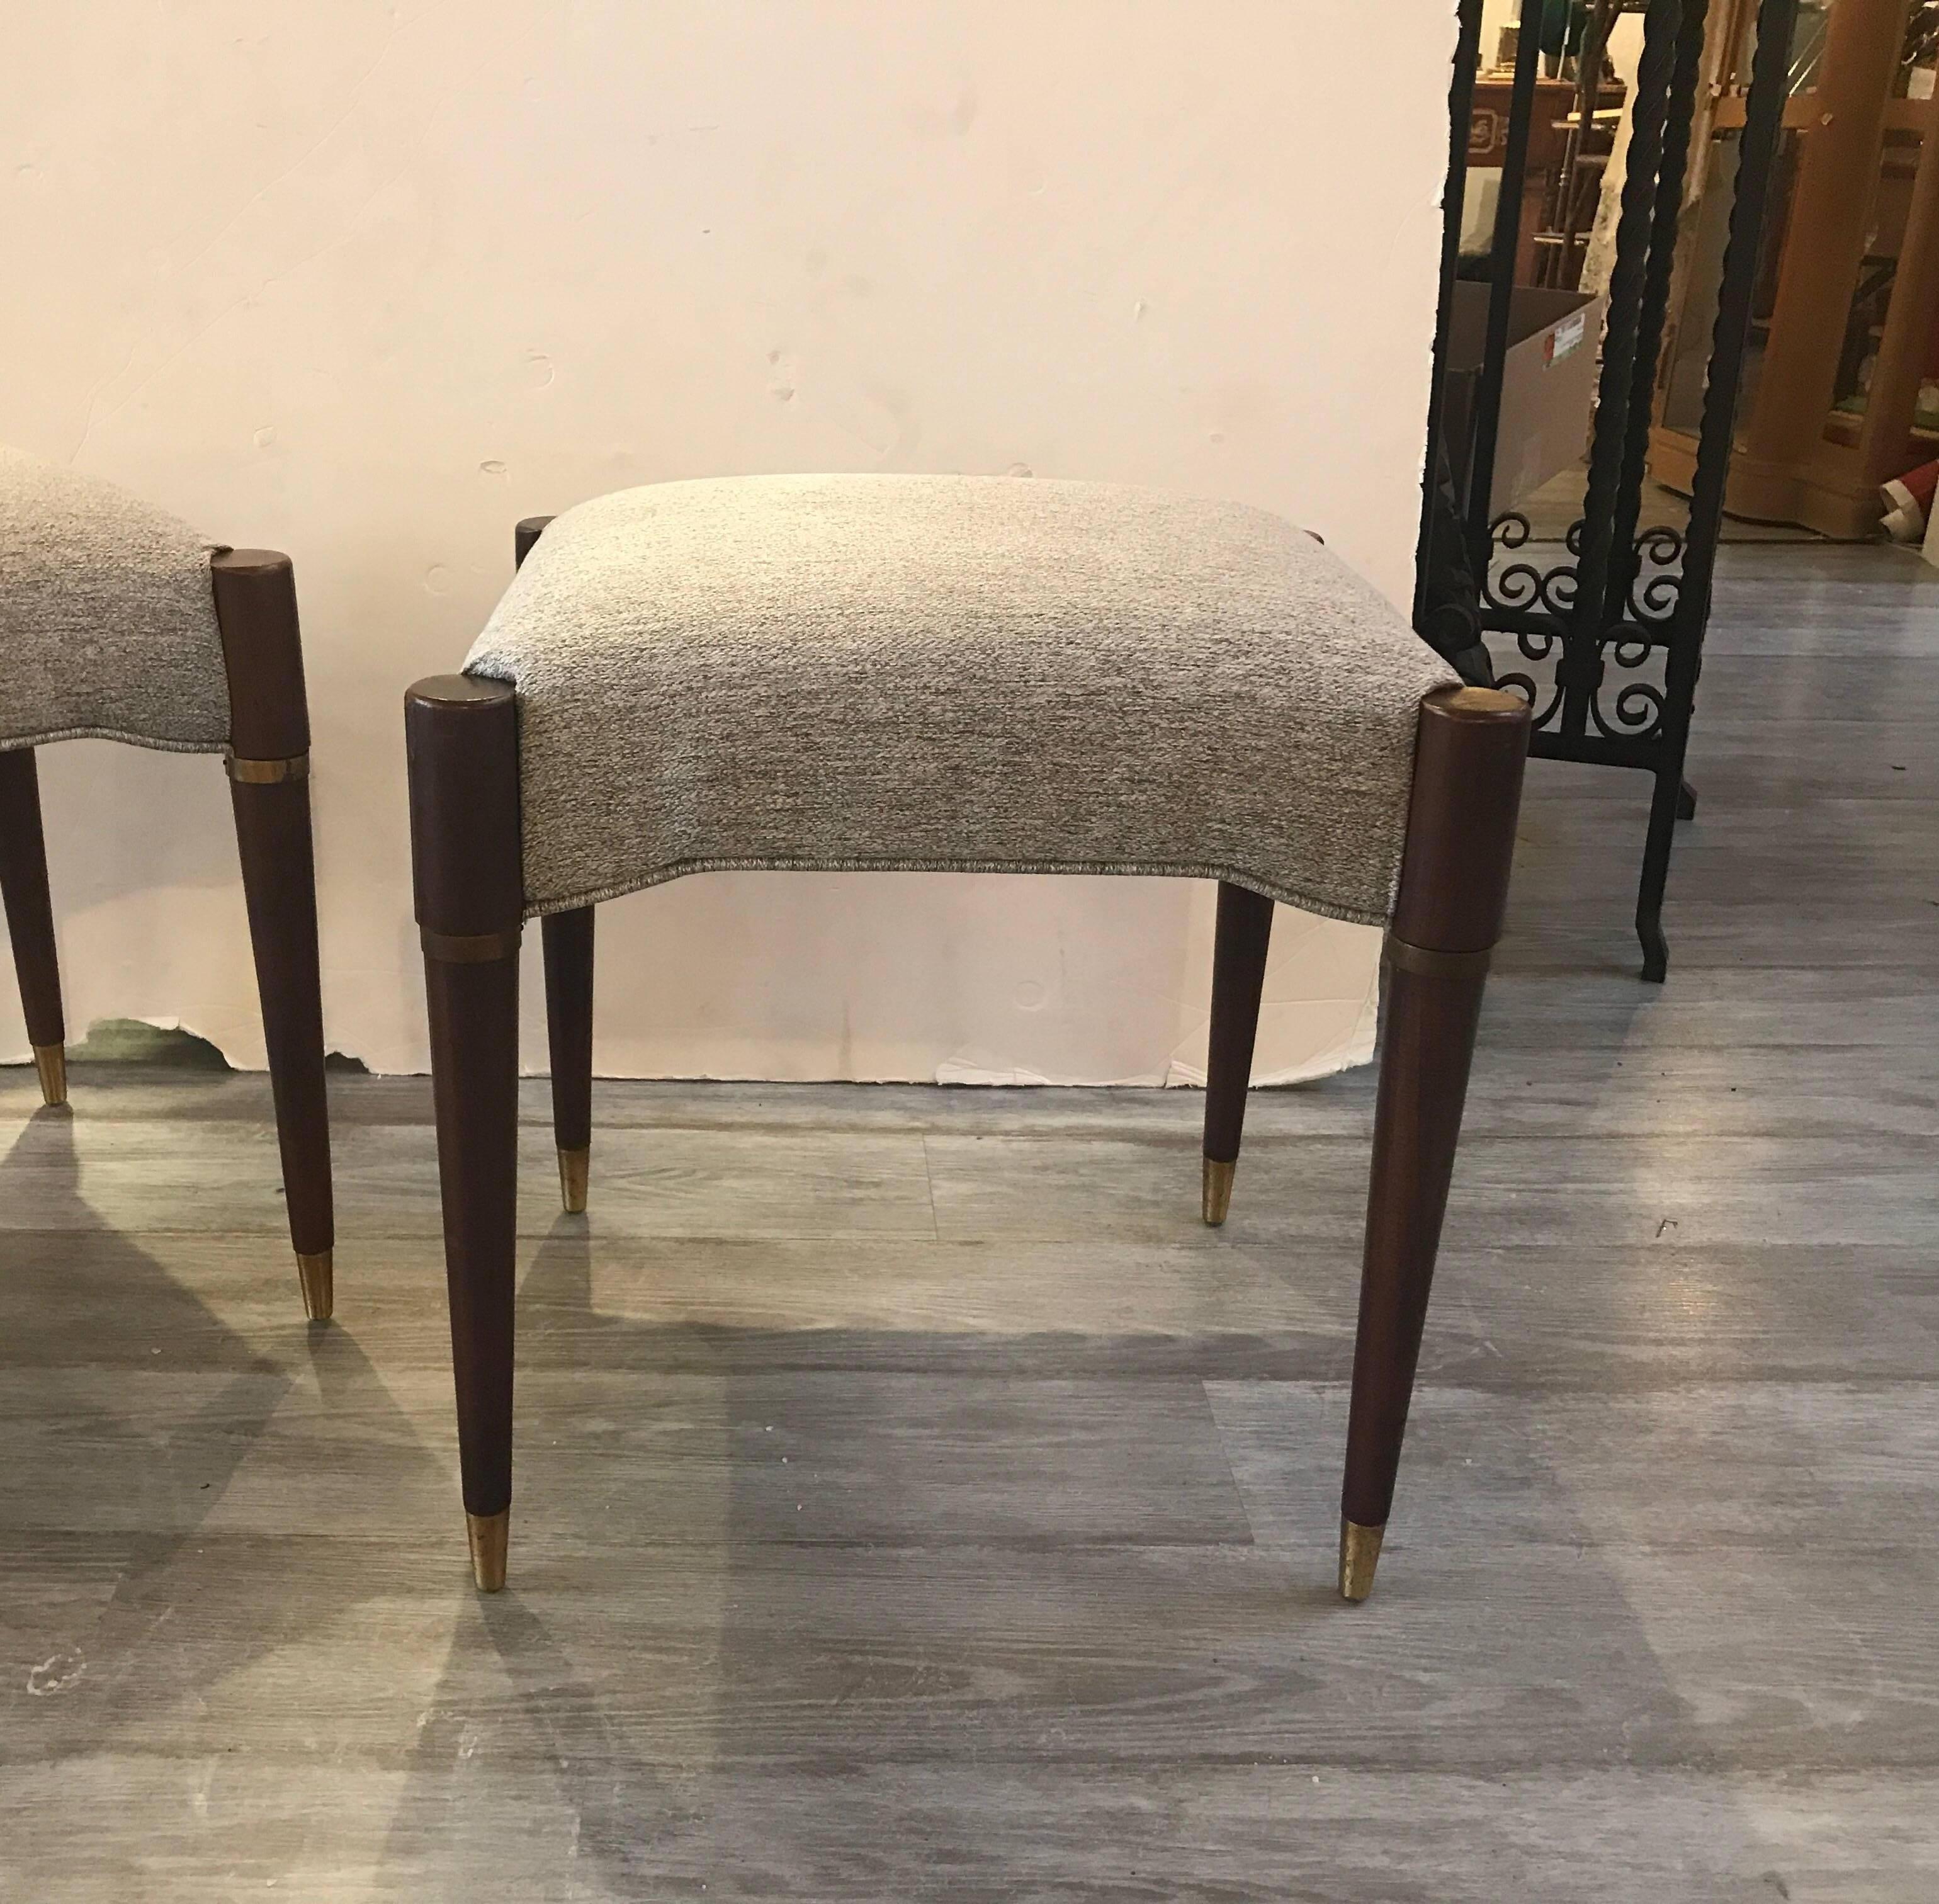 Chic pair of walnut Danish modern benches. The tapering legs with brass ring towards the top and brass cap on the foot. The new fabric is a neutral woven lightly textured cotton linen.